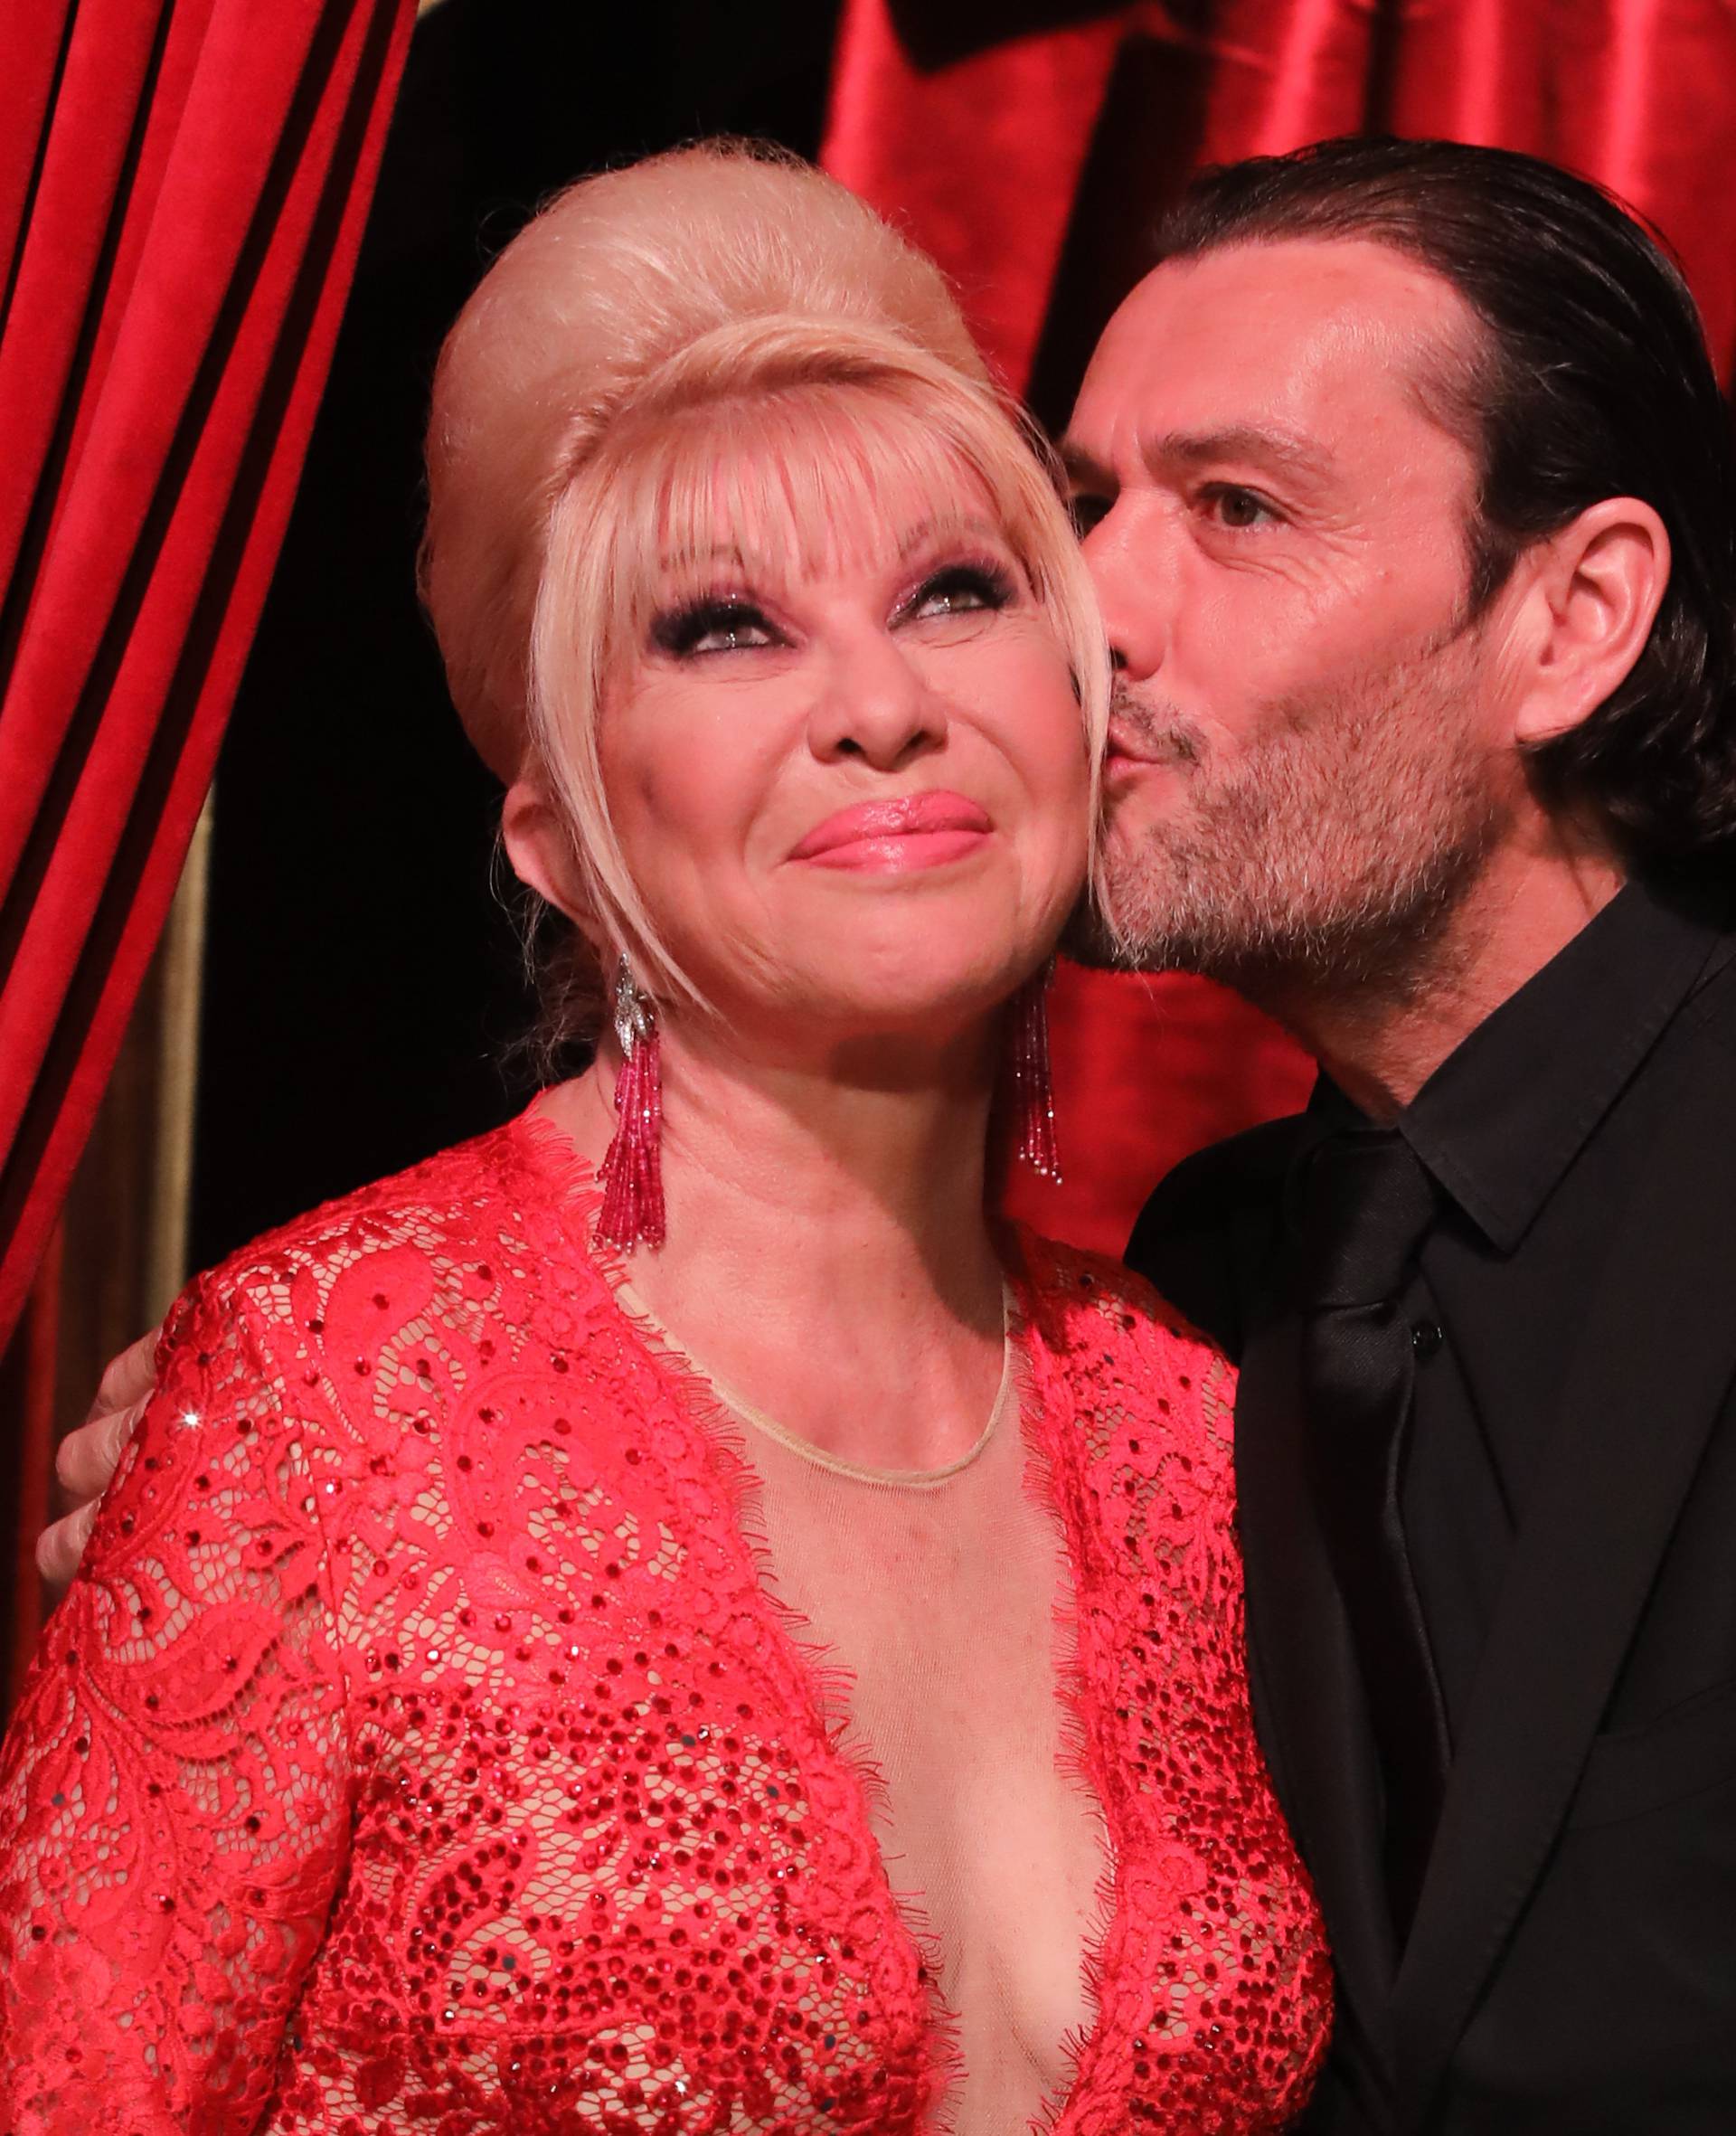 Rome, Ivana Trump "Ballerina for a Night" to "Dancing with the Stars"